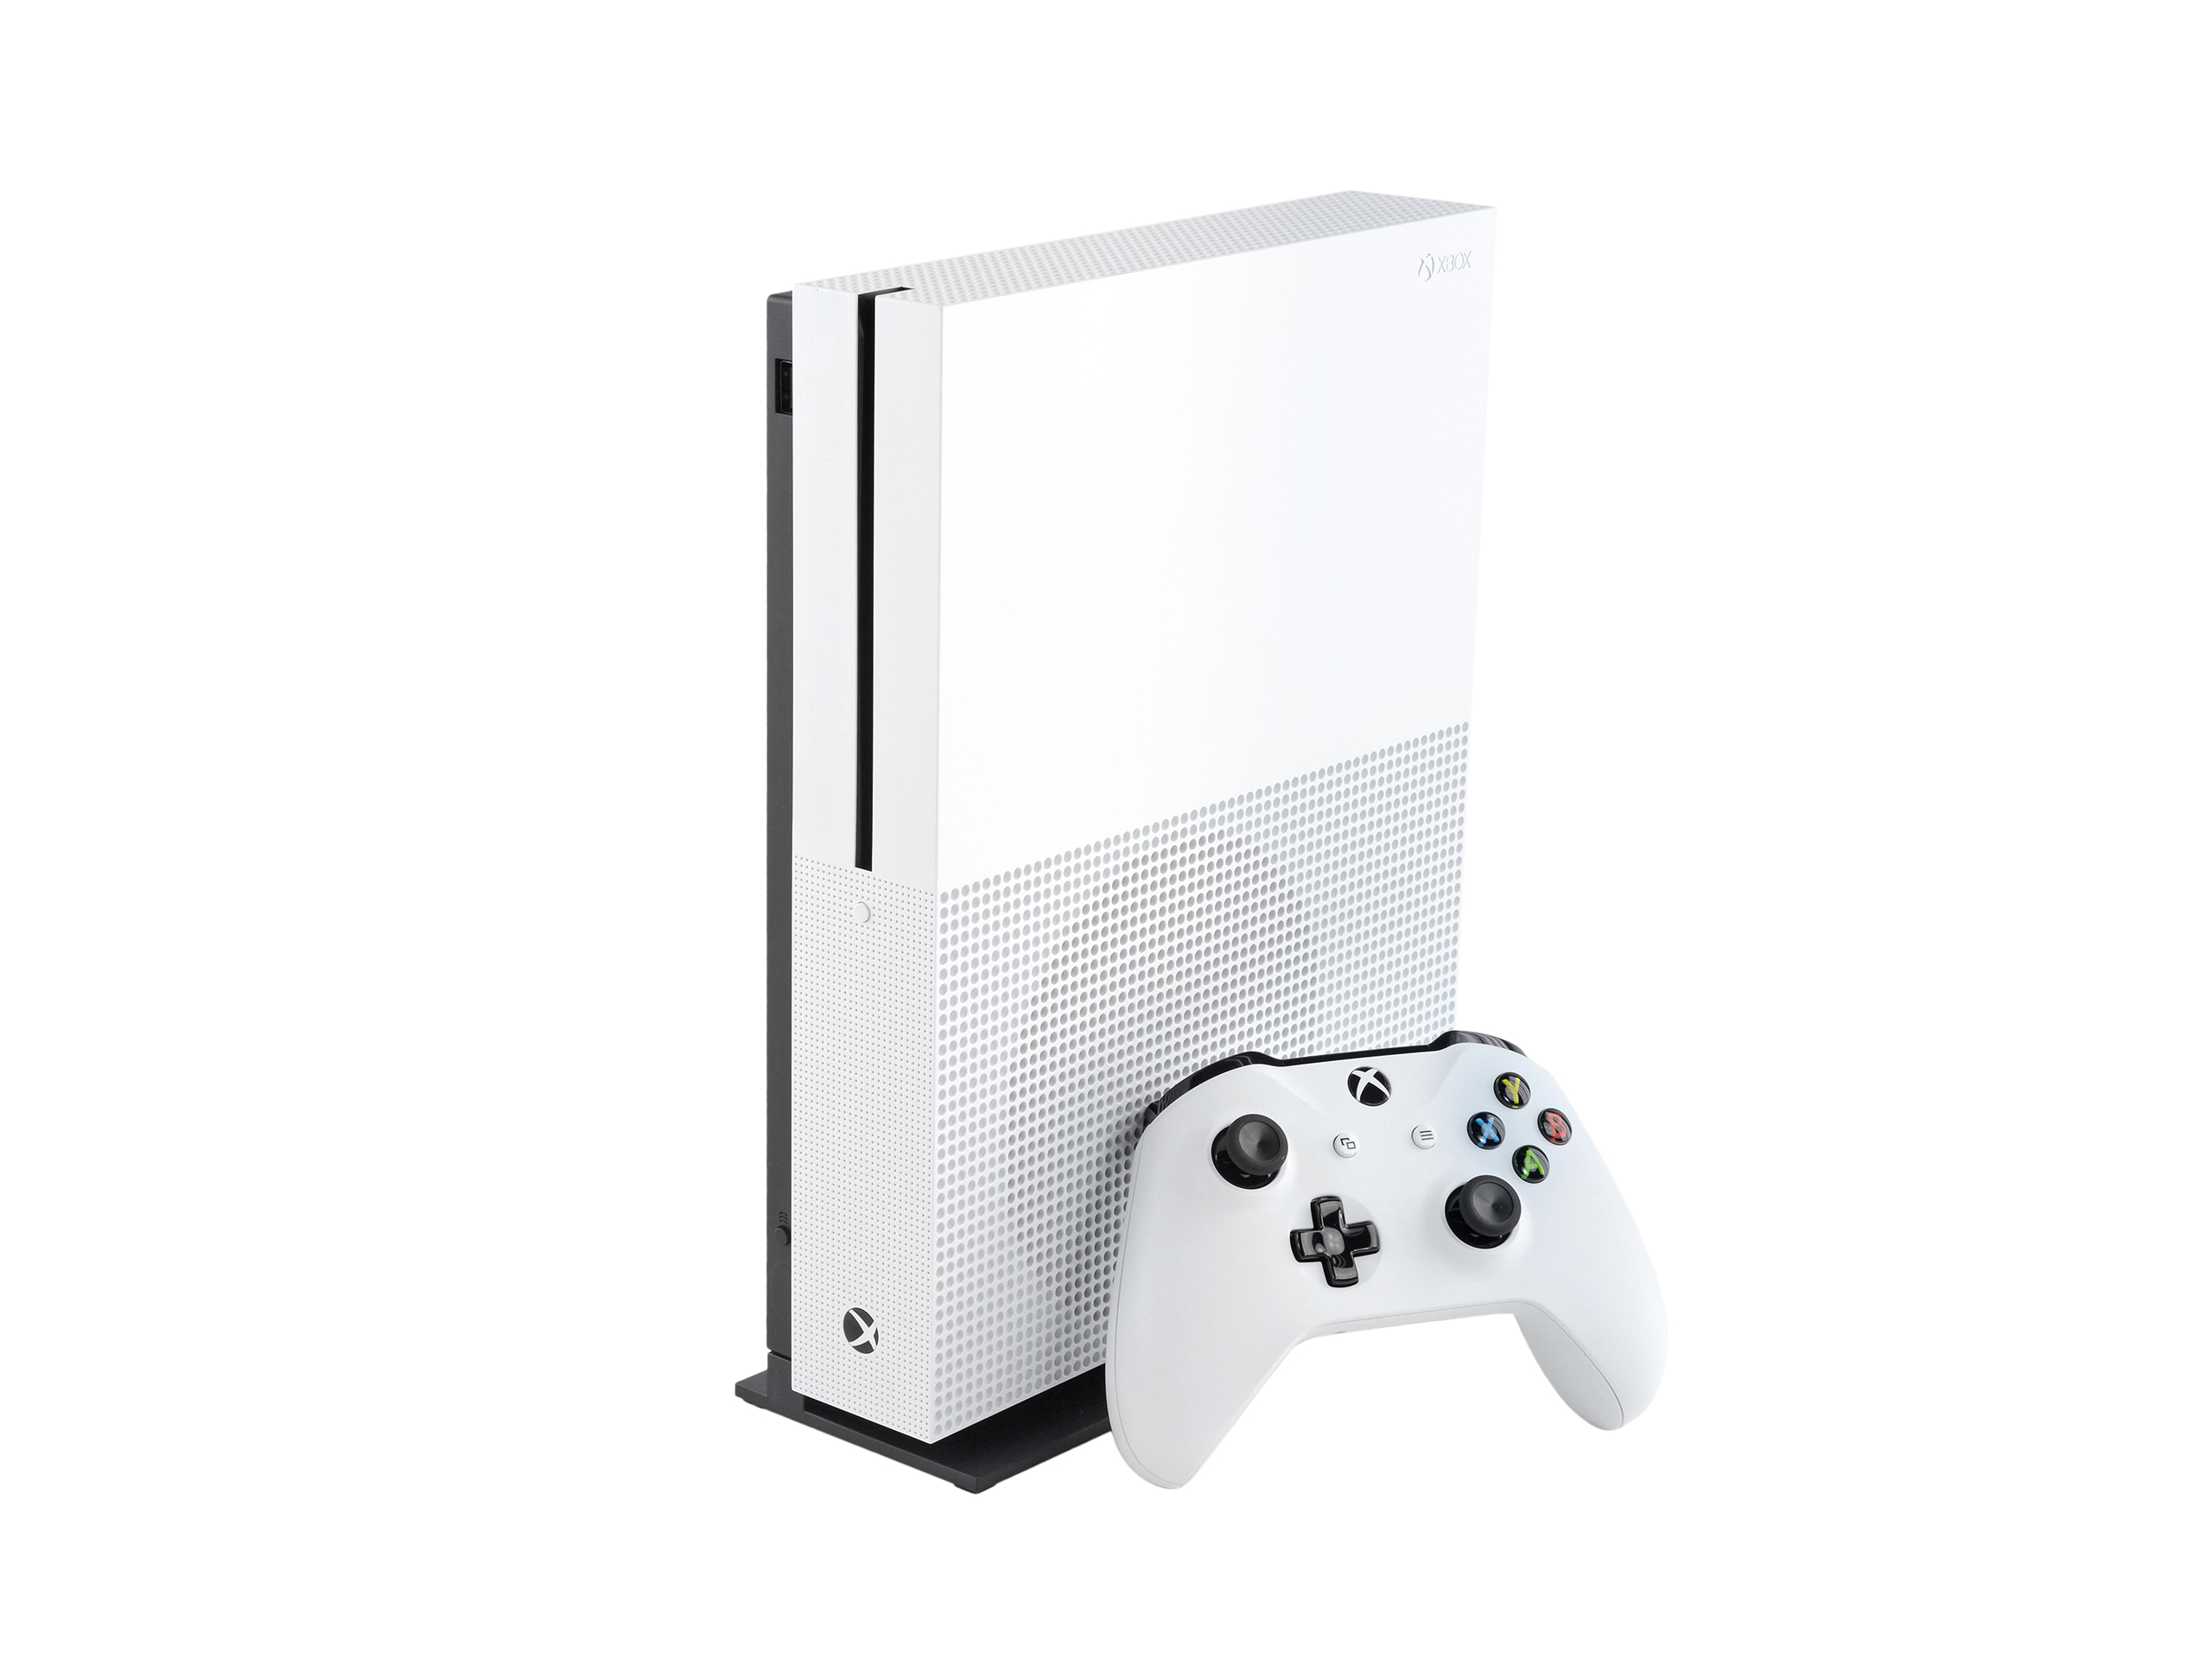 The Xbox One S.